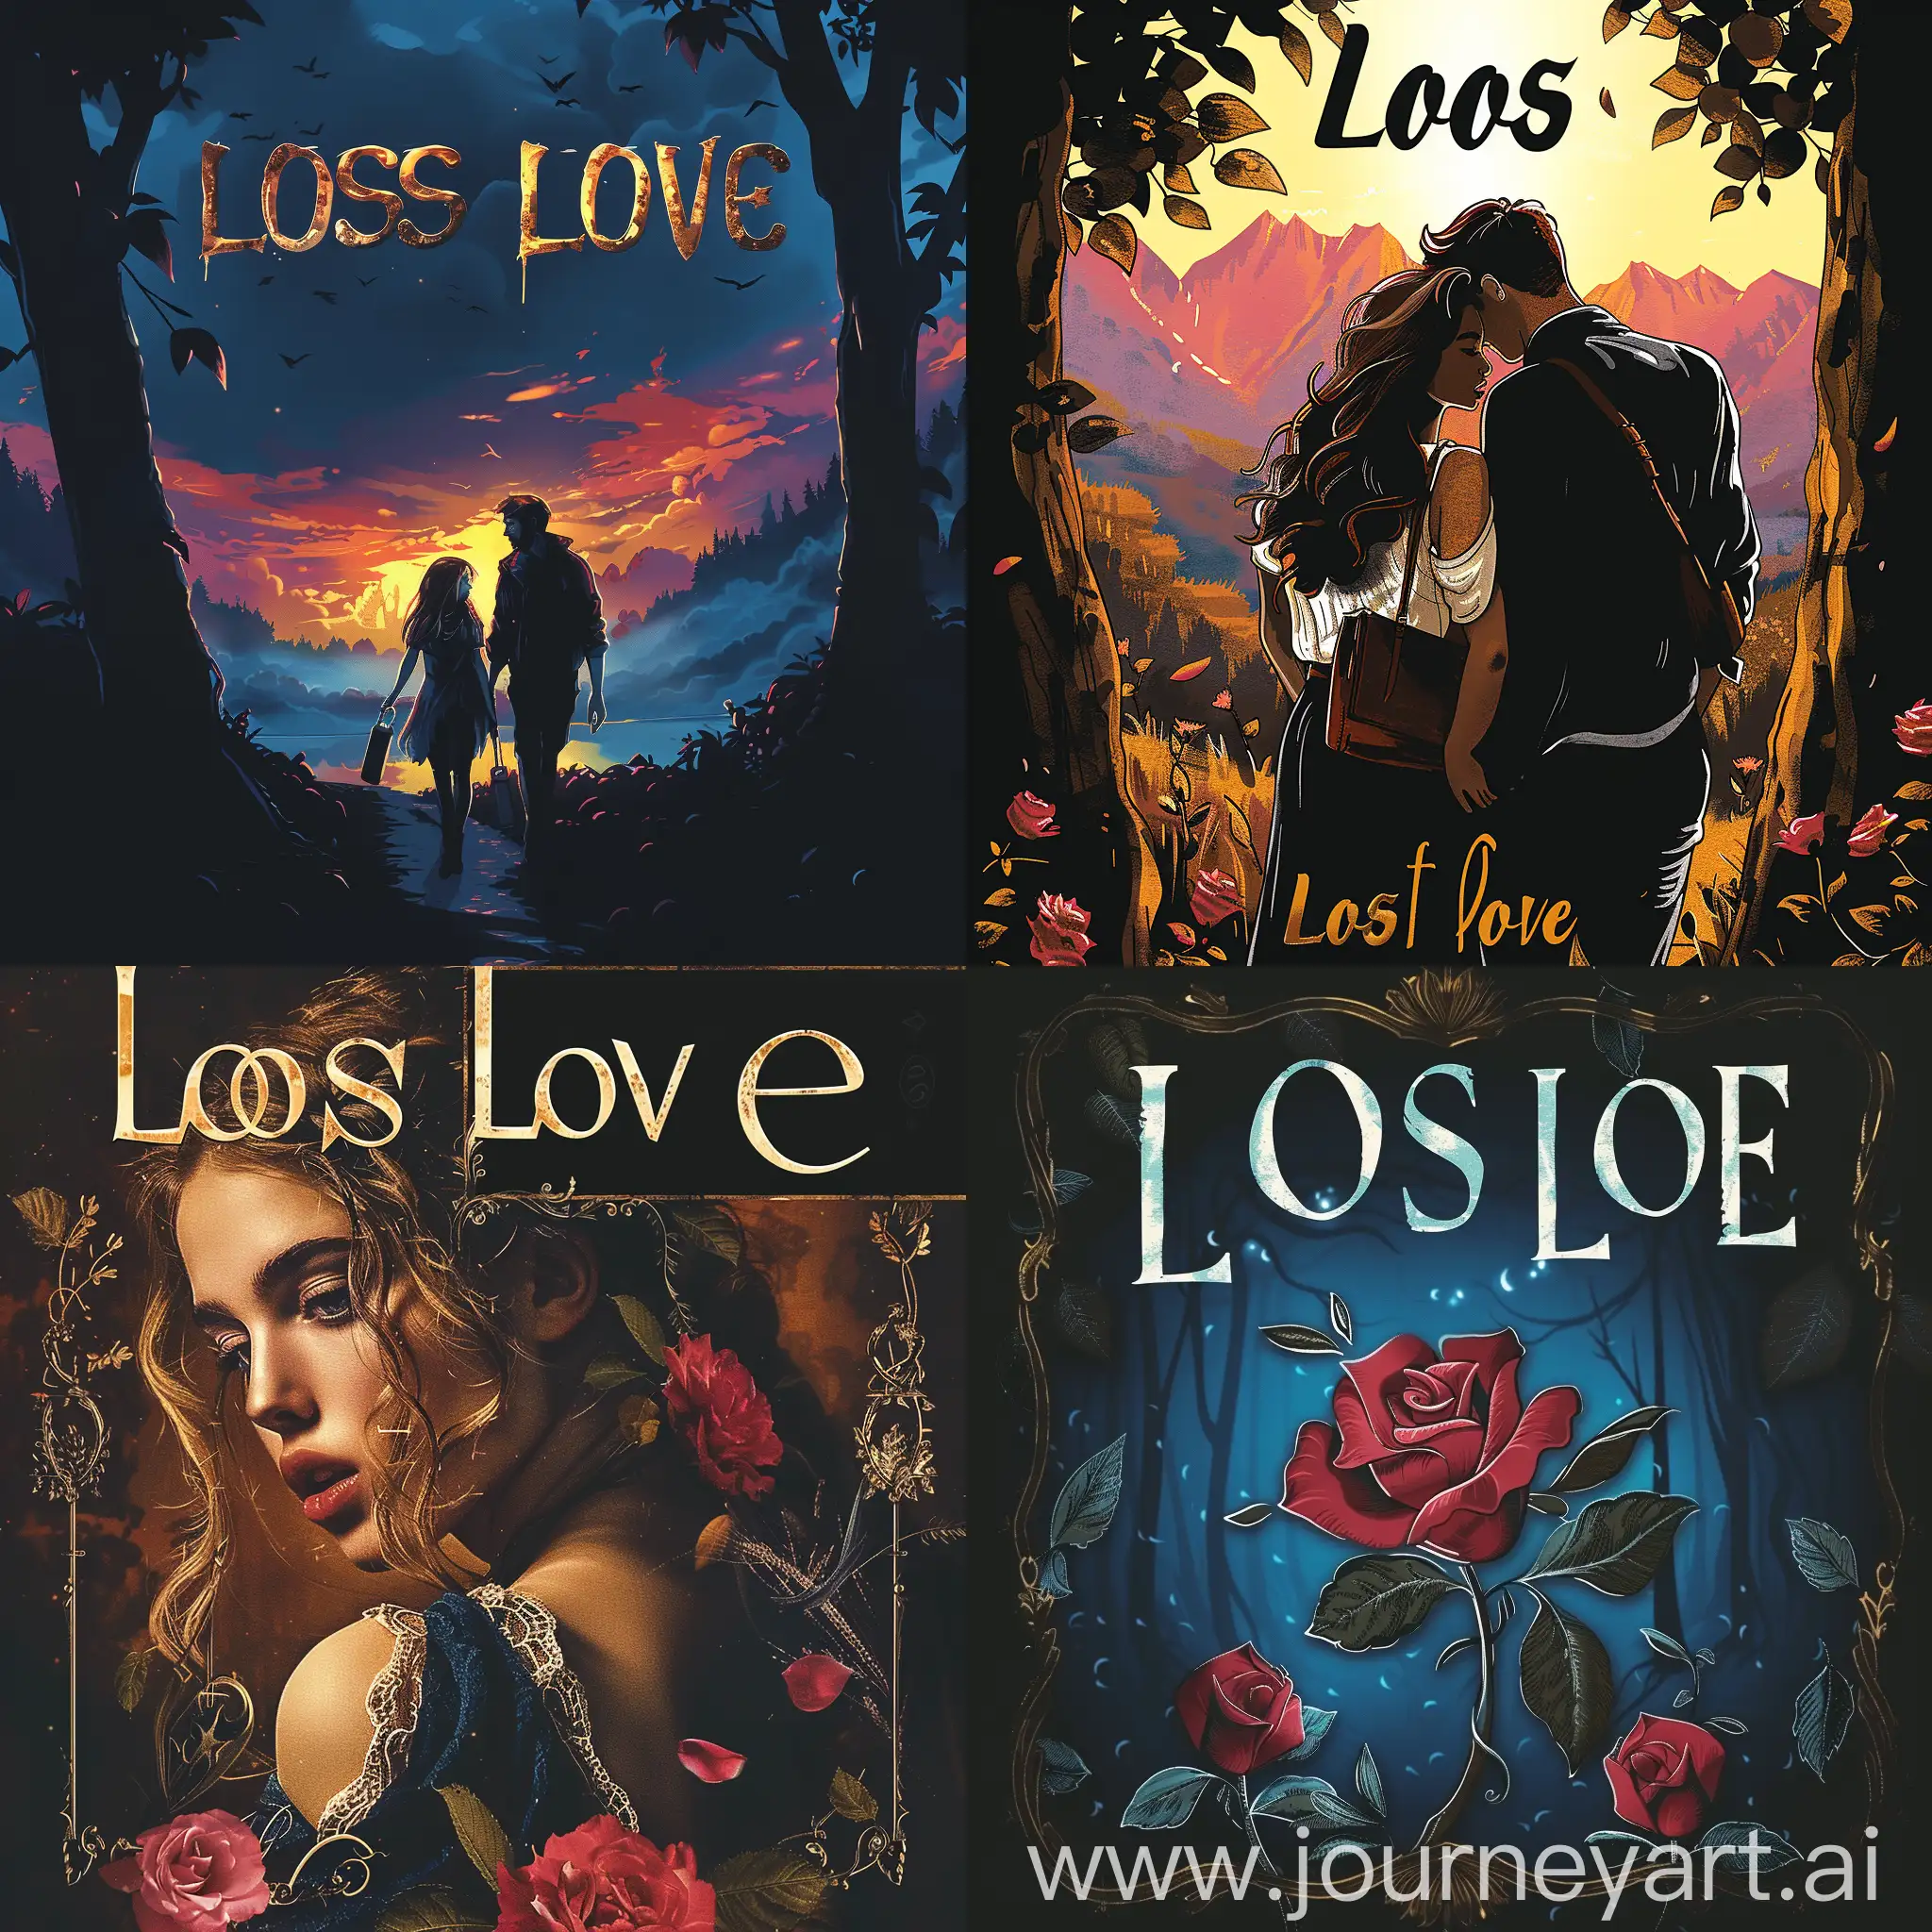 Generate an ebook cover for lost love